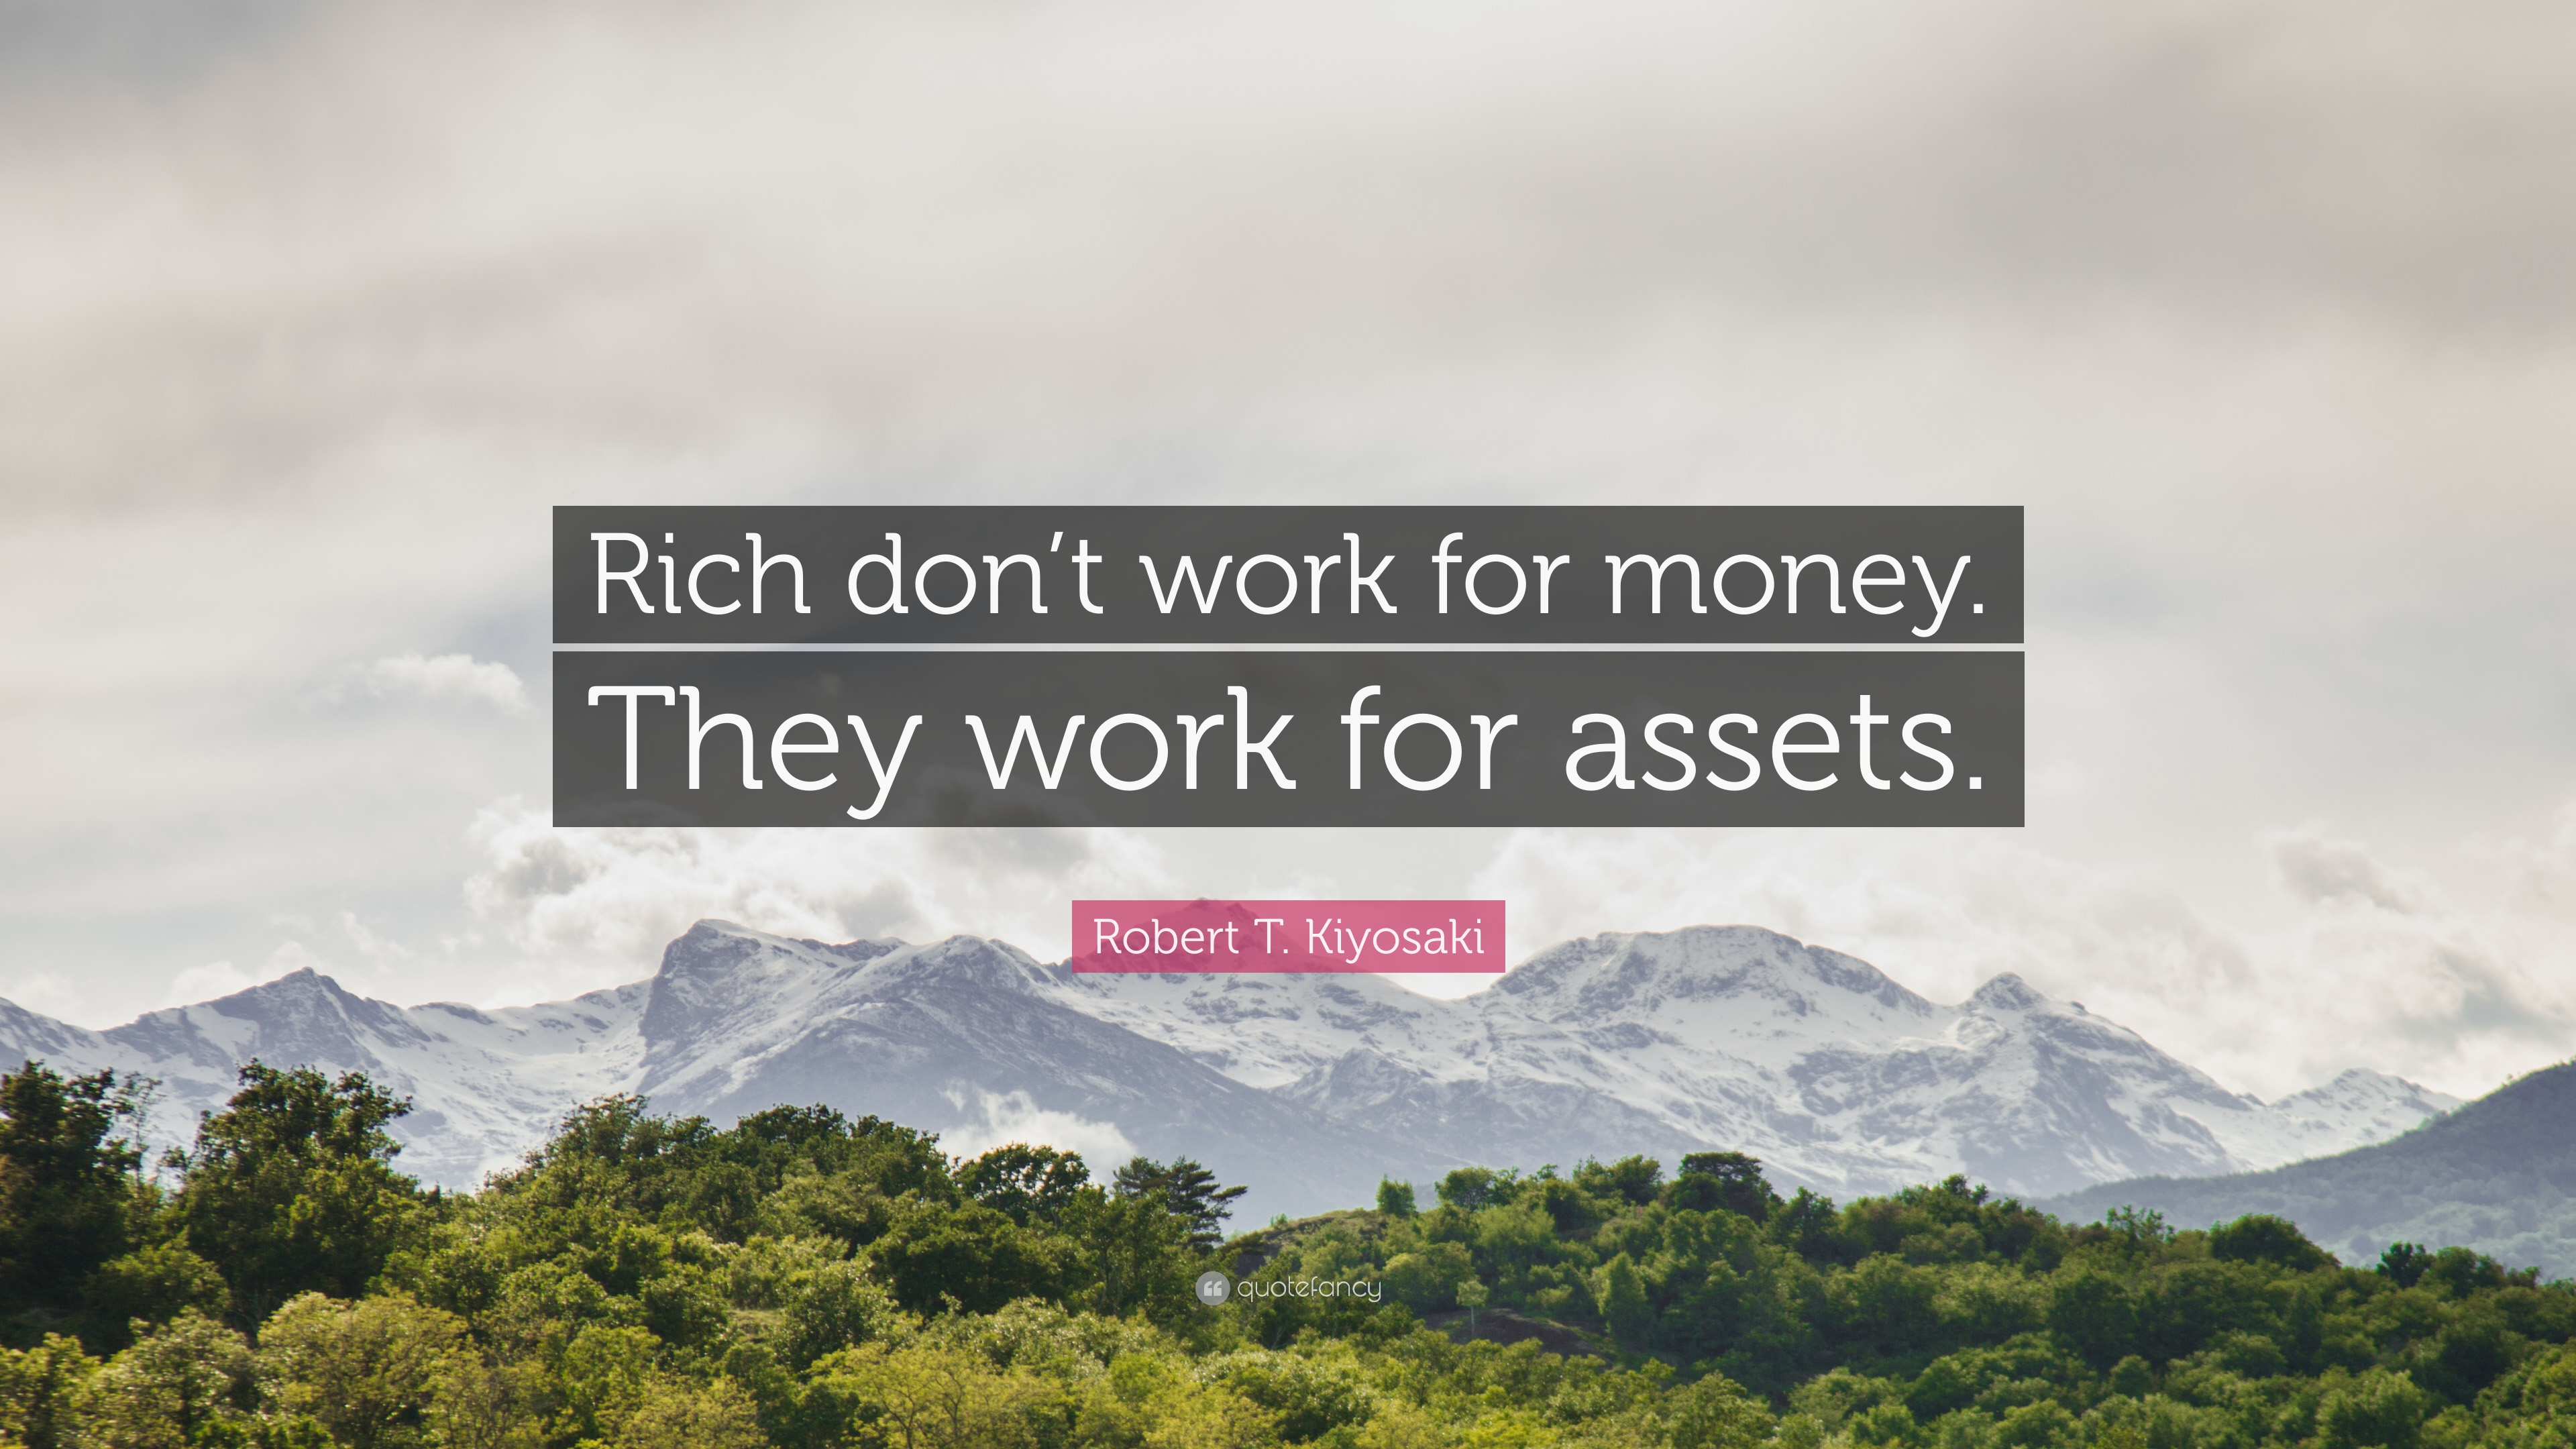 Robert T. Kiyosaki Quote: “Rich don't work for money. They work for assets.”